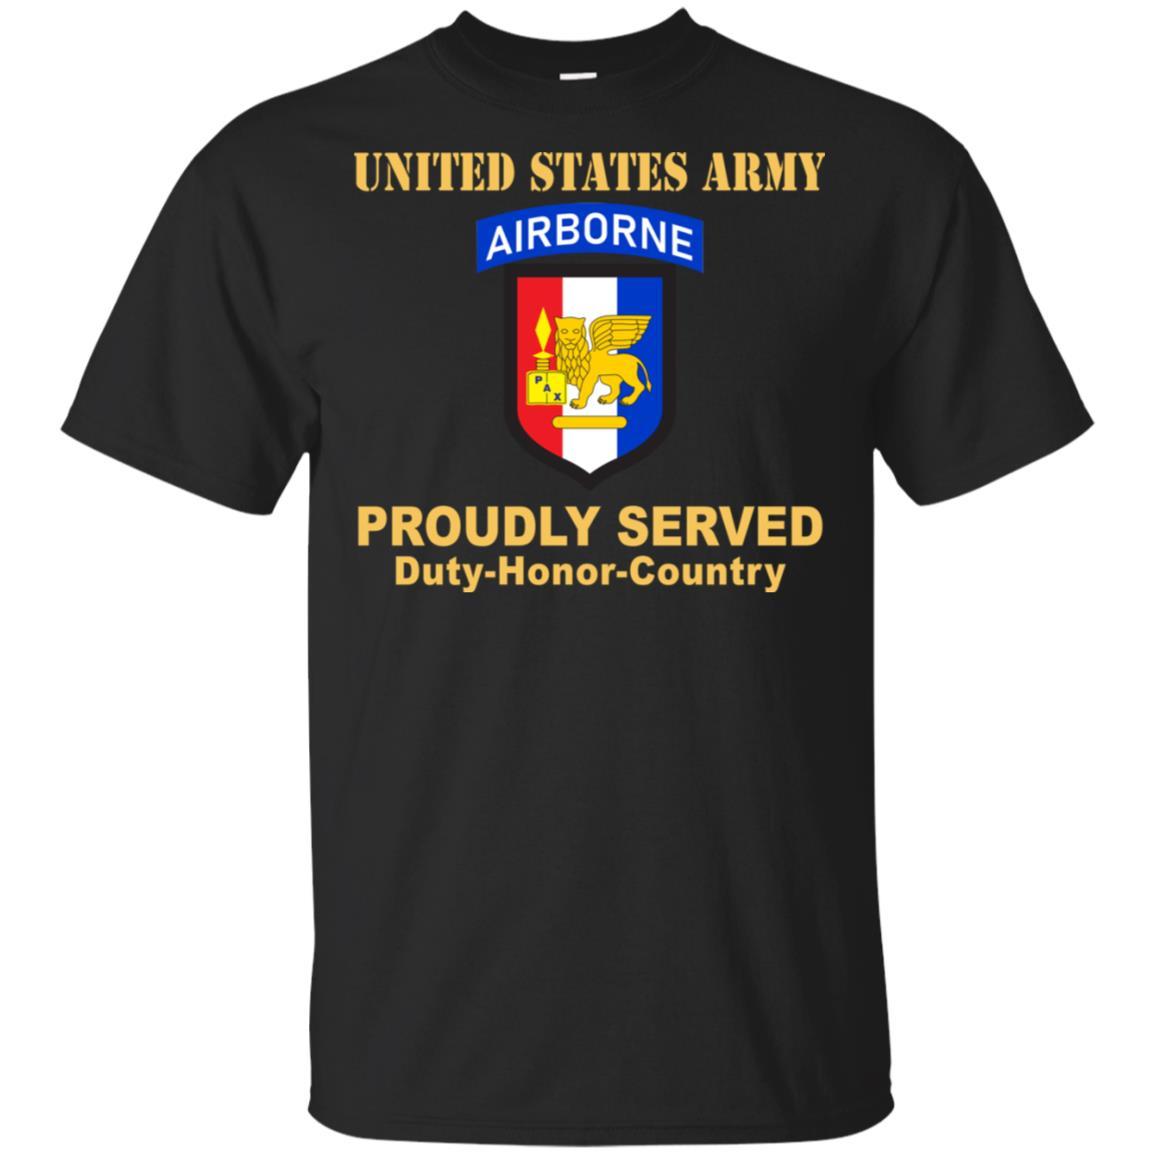 US ARMY SOUTHERN EUROPEAN TASK FORCE WITH AIRBORNE TAB- Proudly Served T-Shirt On Front For Men-TShirt-Army-Veterans Nation